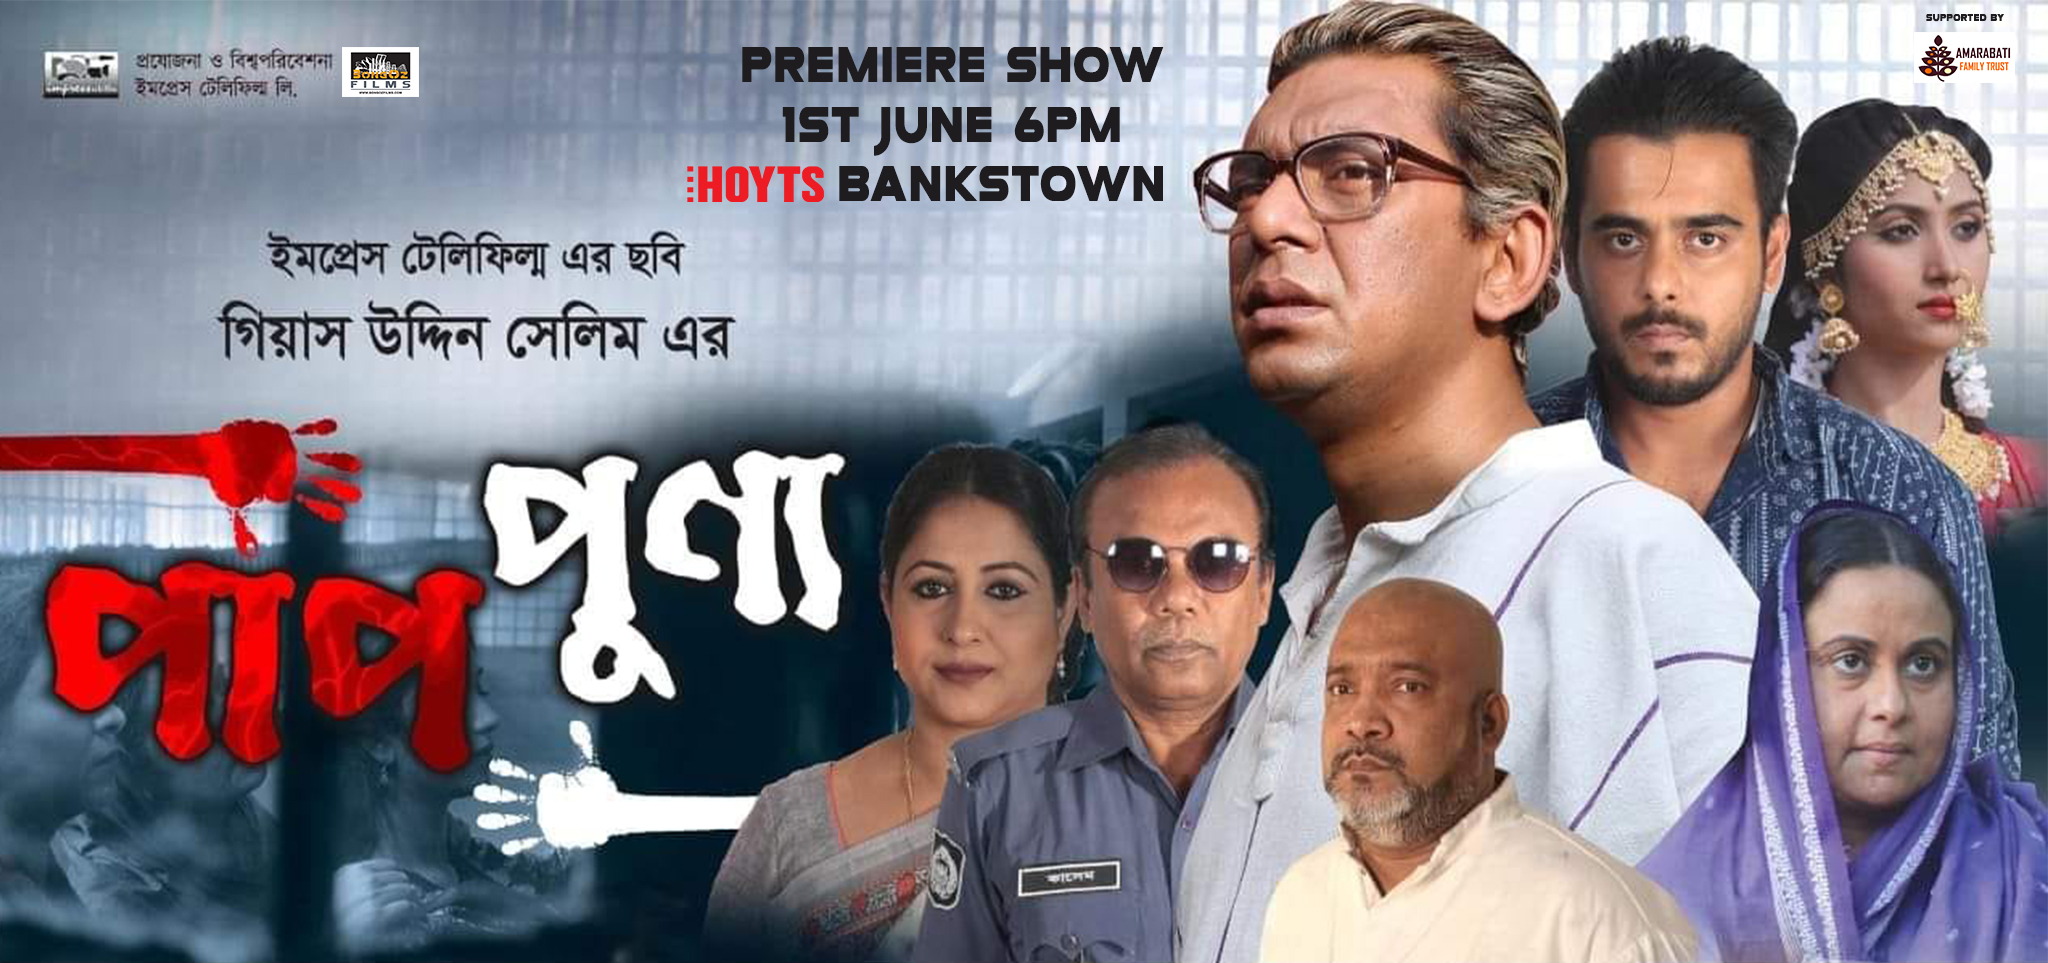 Premiere show of Paap Punno in Australia